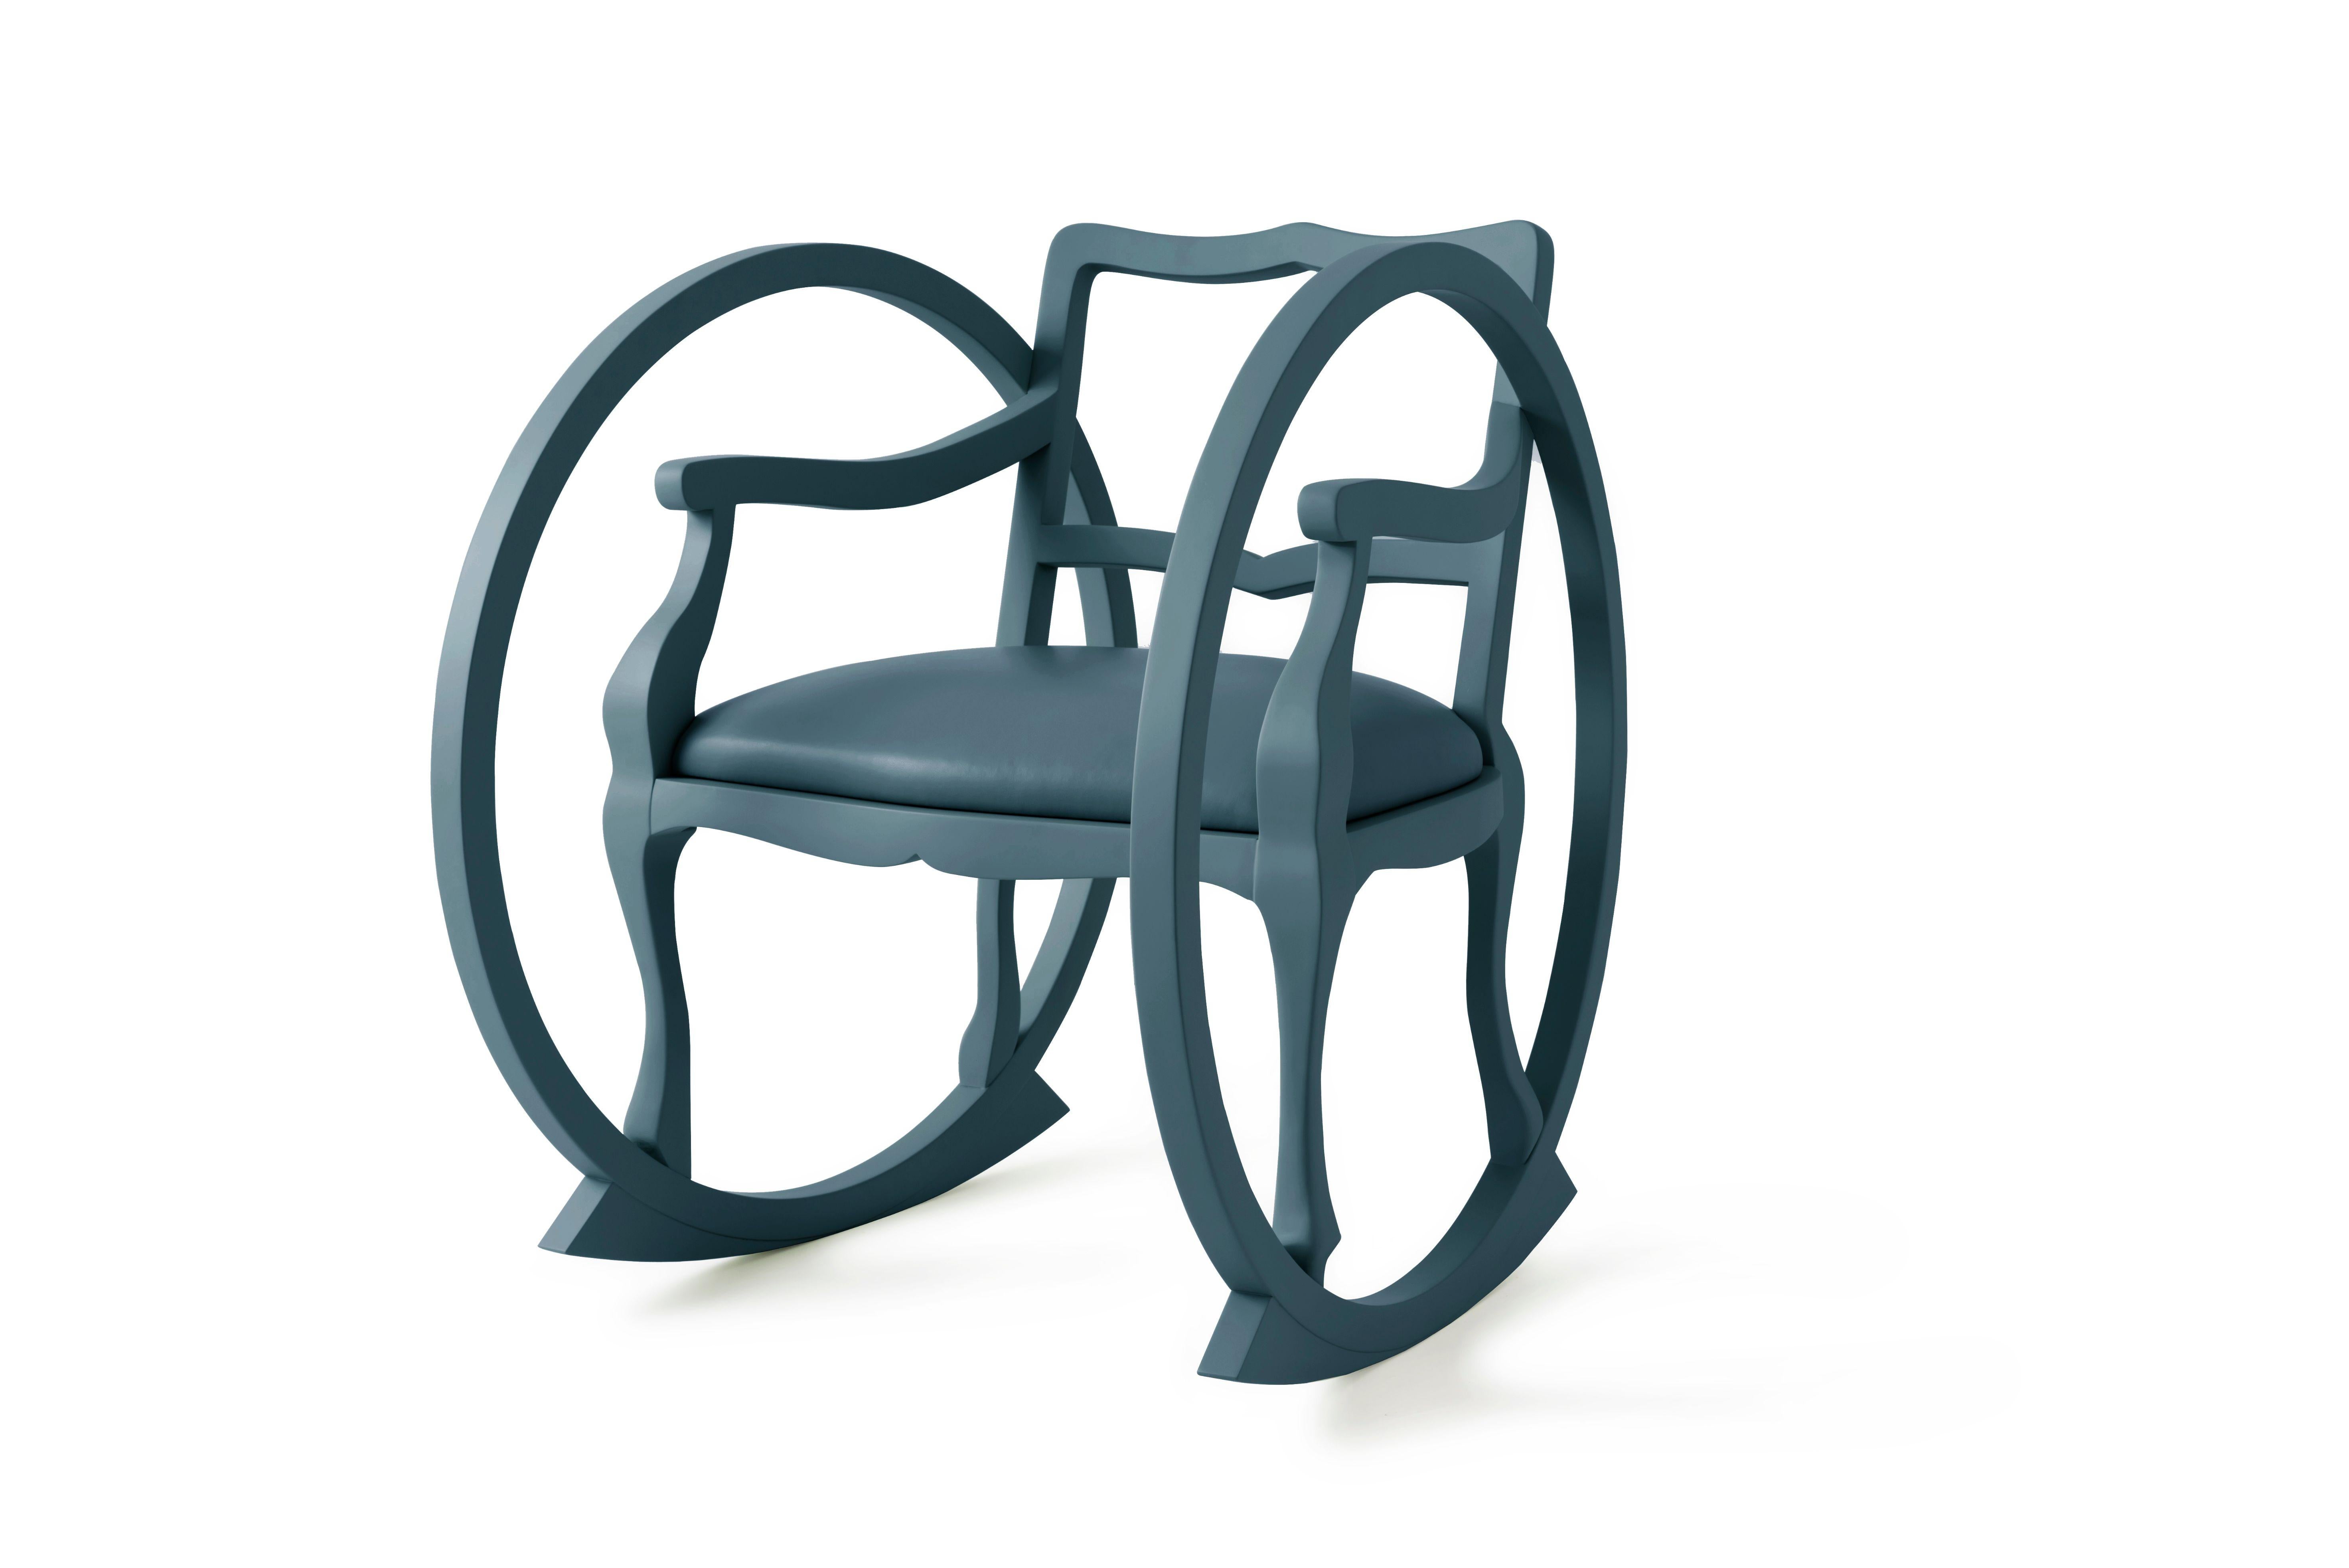 Contemporary rocking chair designed by Thomas Dariel, Maison Dada
Measures: W 76 x D 95 x H 97 cm
Structure in solid beech with matte painted finish
Upholstery in leather
Available in 2 colors (Petrol Blue or Grey)
Tick-tock, tick-tock, as the clock